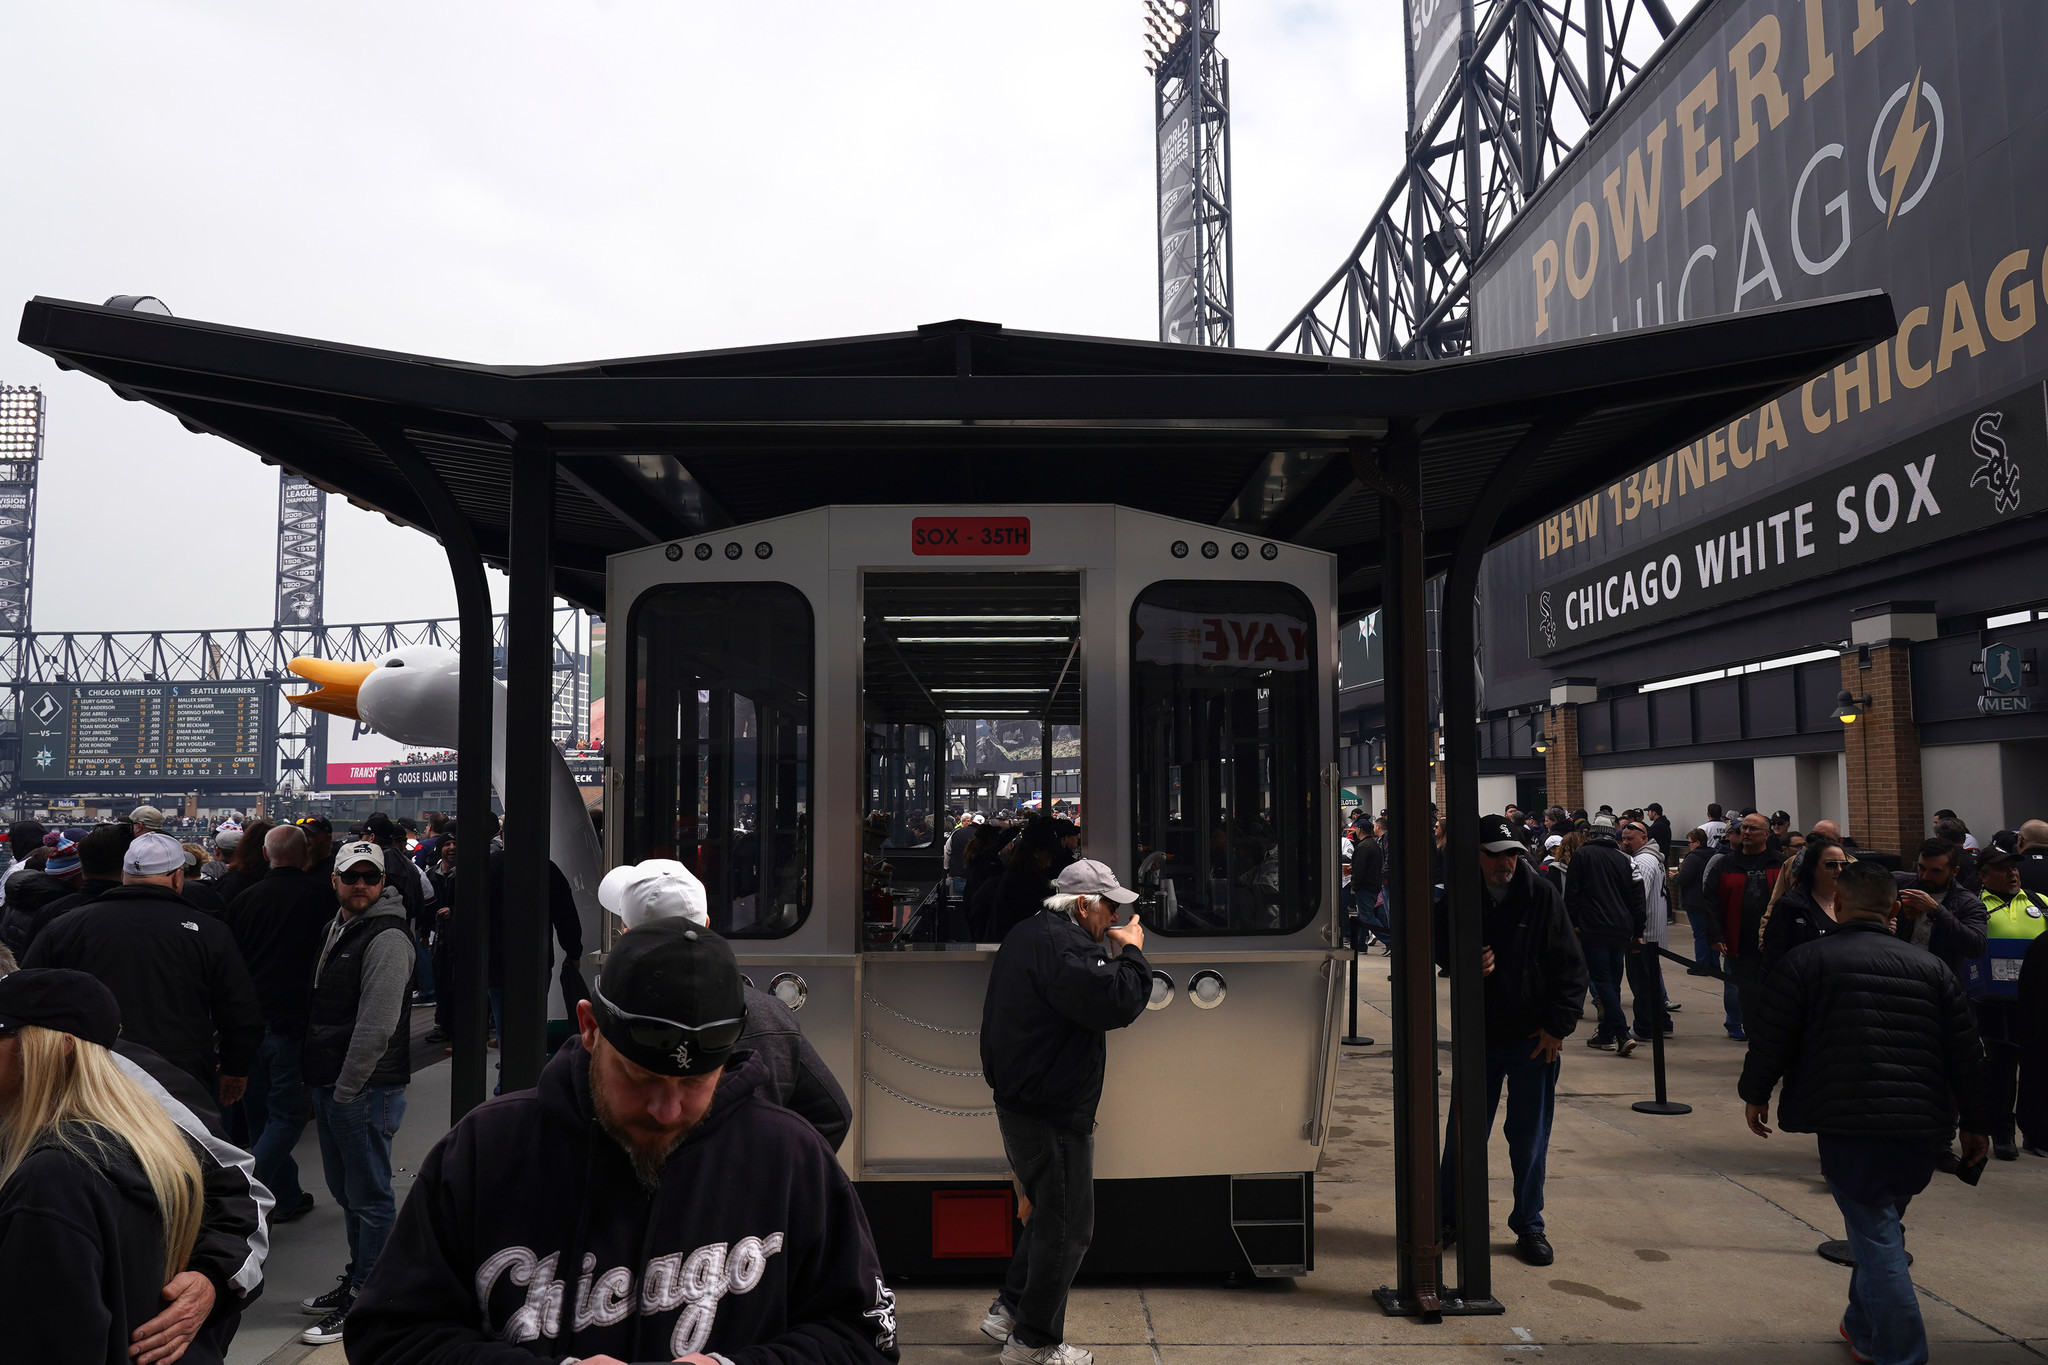 Chicago White Sox on X: The Goose Island is a new space